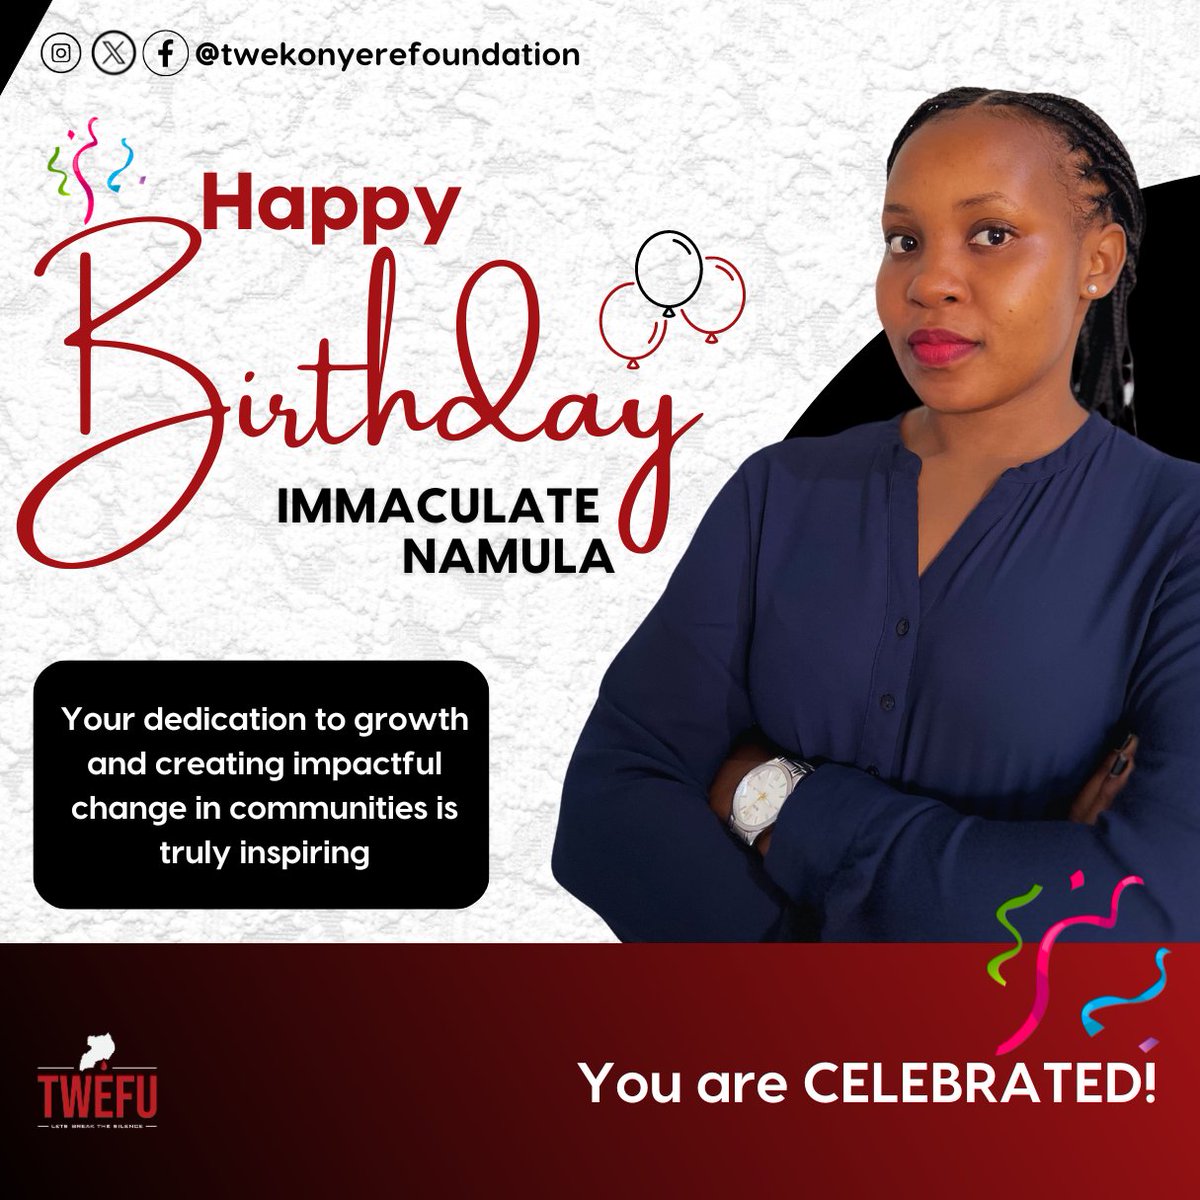 Happy Birthday to our wonderful programs associate @namulaimma Your dedication to serving rural communities is truly inspiring. Wishing you a day filled with joy, blessings, and appreciation for all the amazing work you do. 🎉🎂